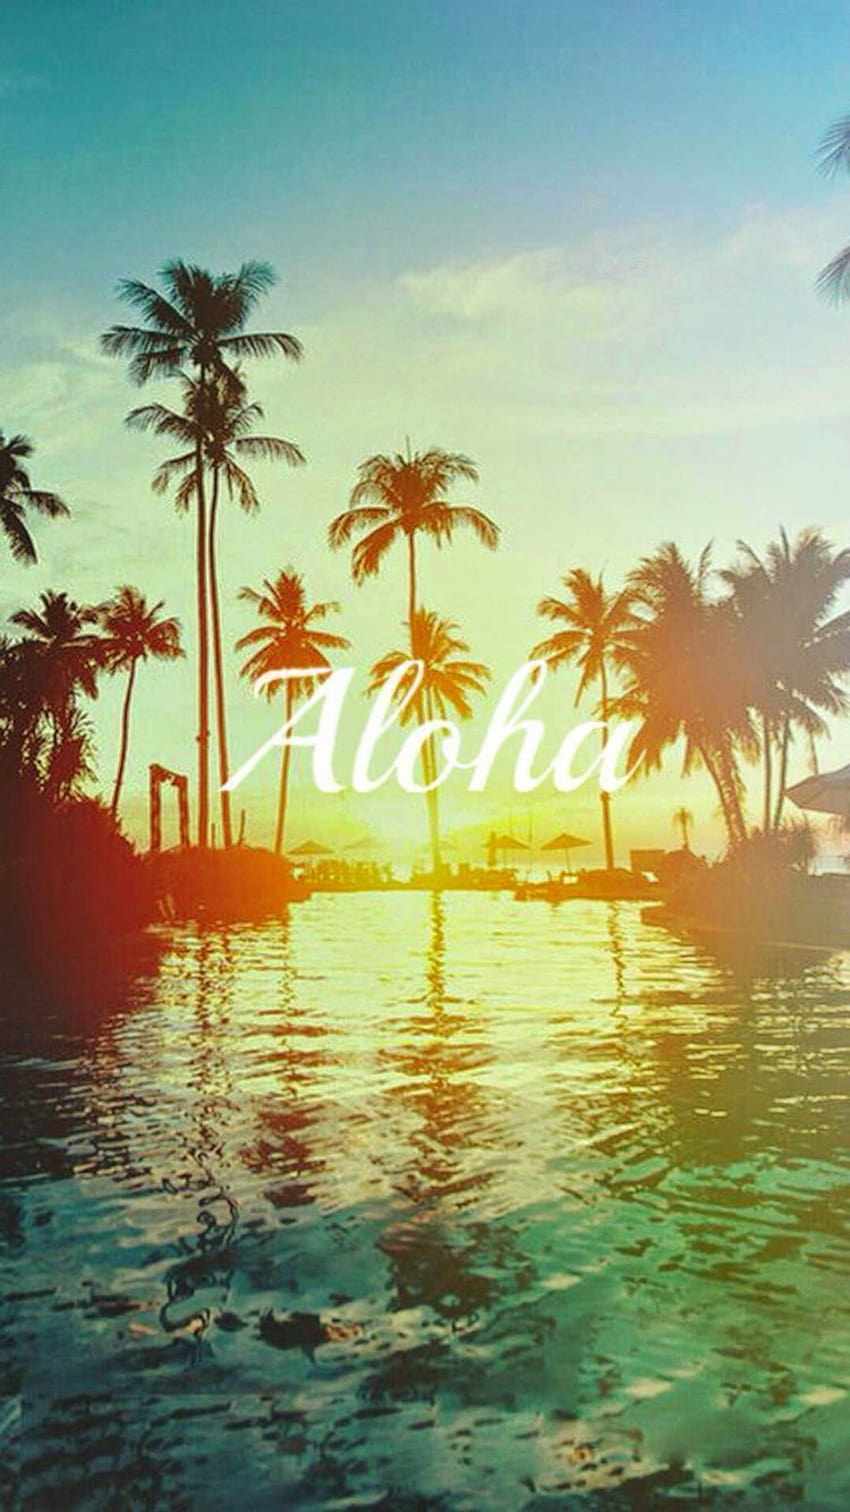 Aloha Hawaii wallpaper by Spider9162  Download on ZEDGE  cd4d